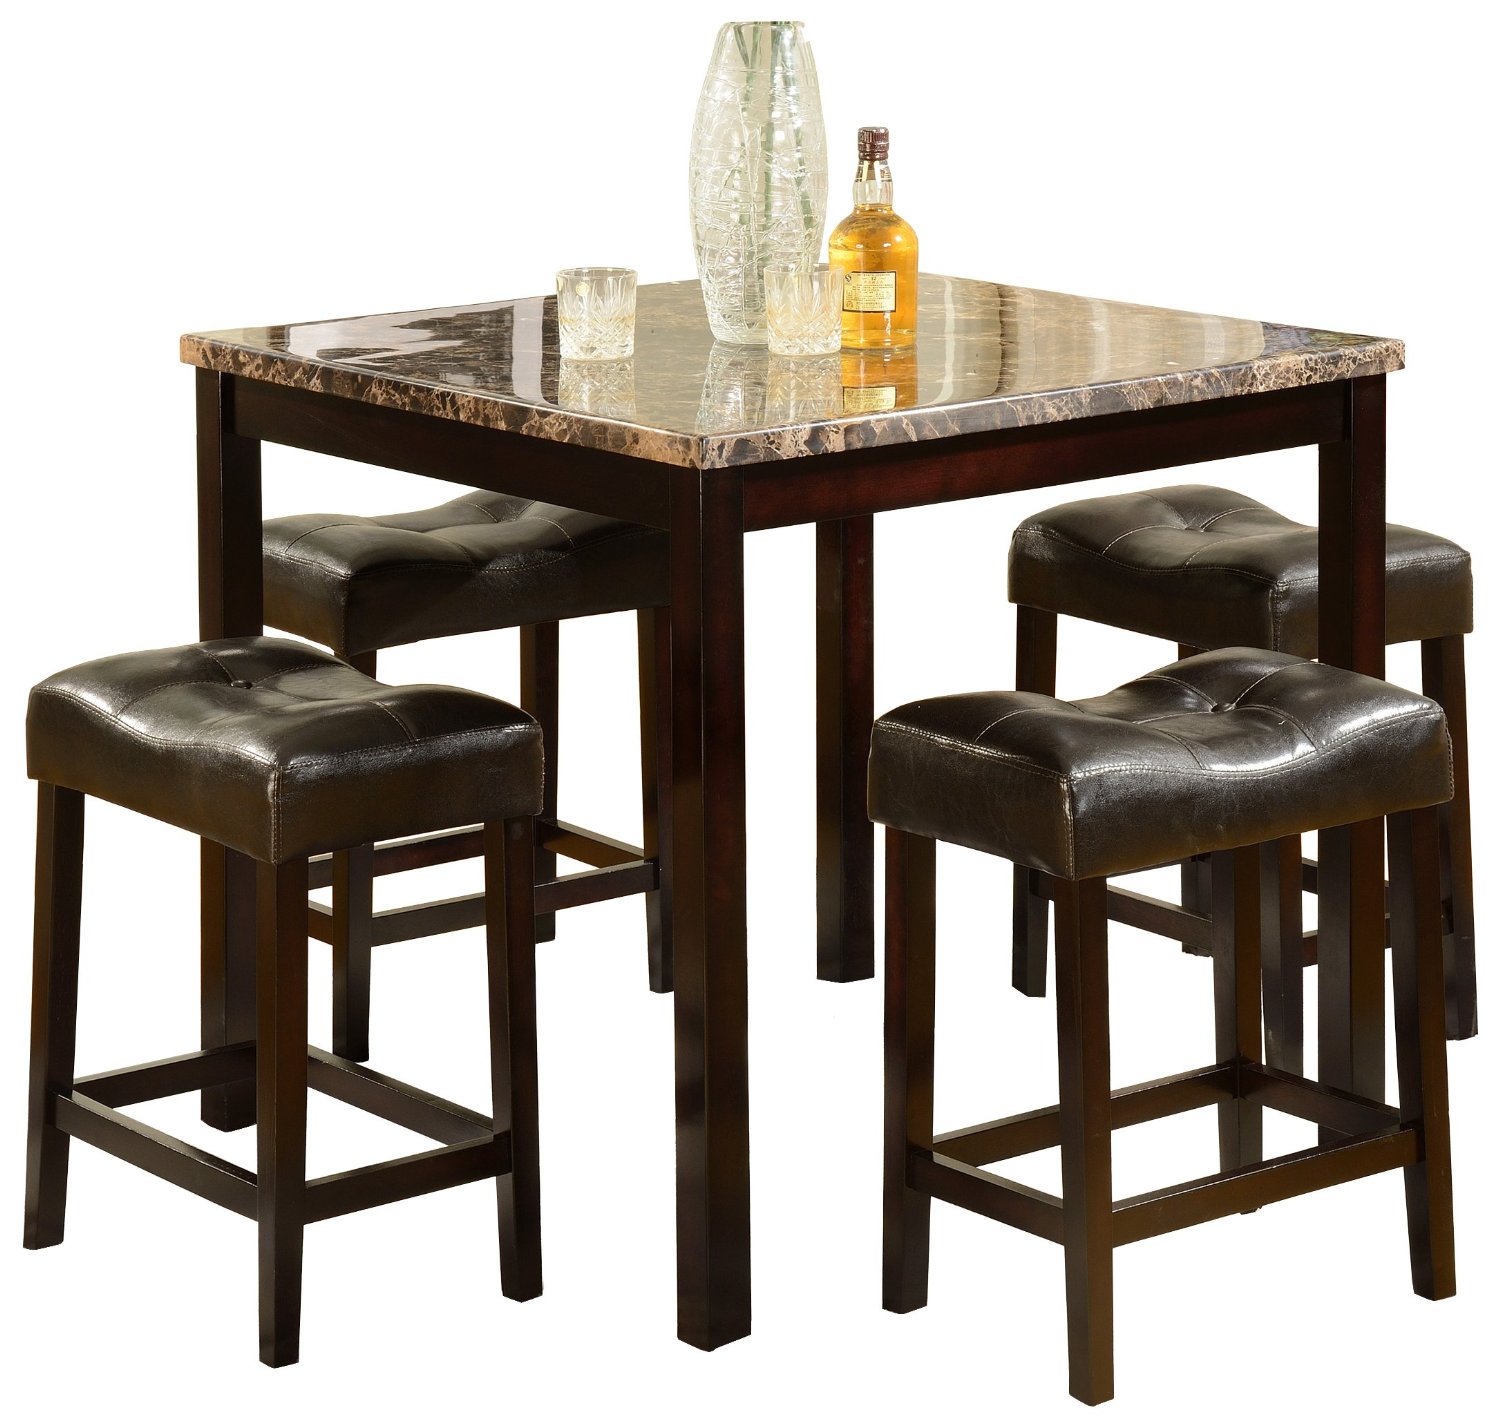 High Top Table Sets to Create an Entertaining Dining Space | HomesFeed